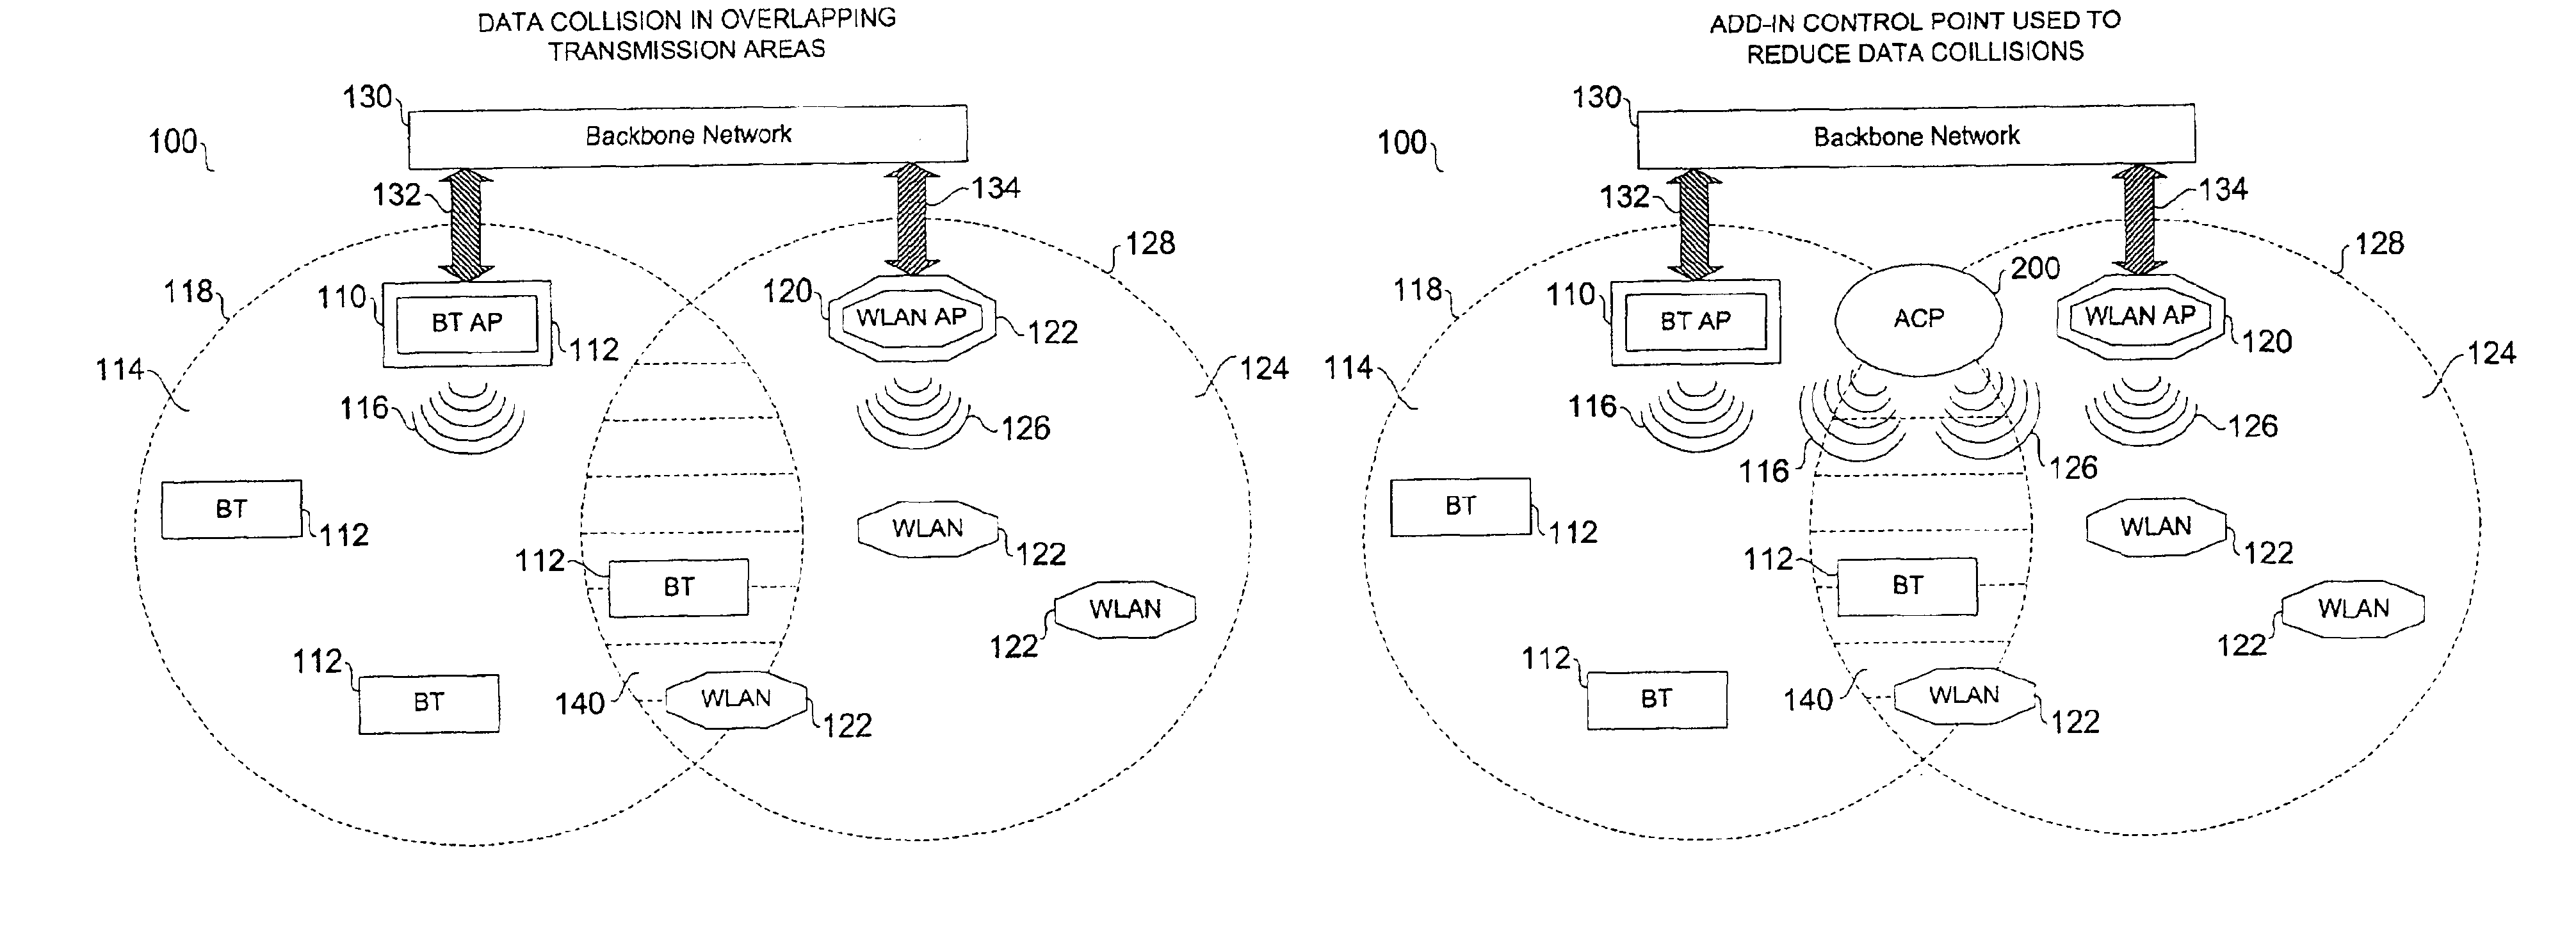 Top-level controller for wireless communication devices and protocols